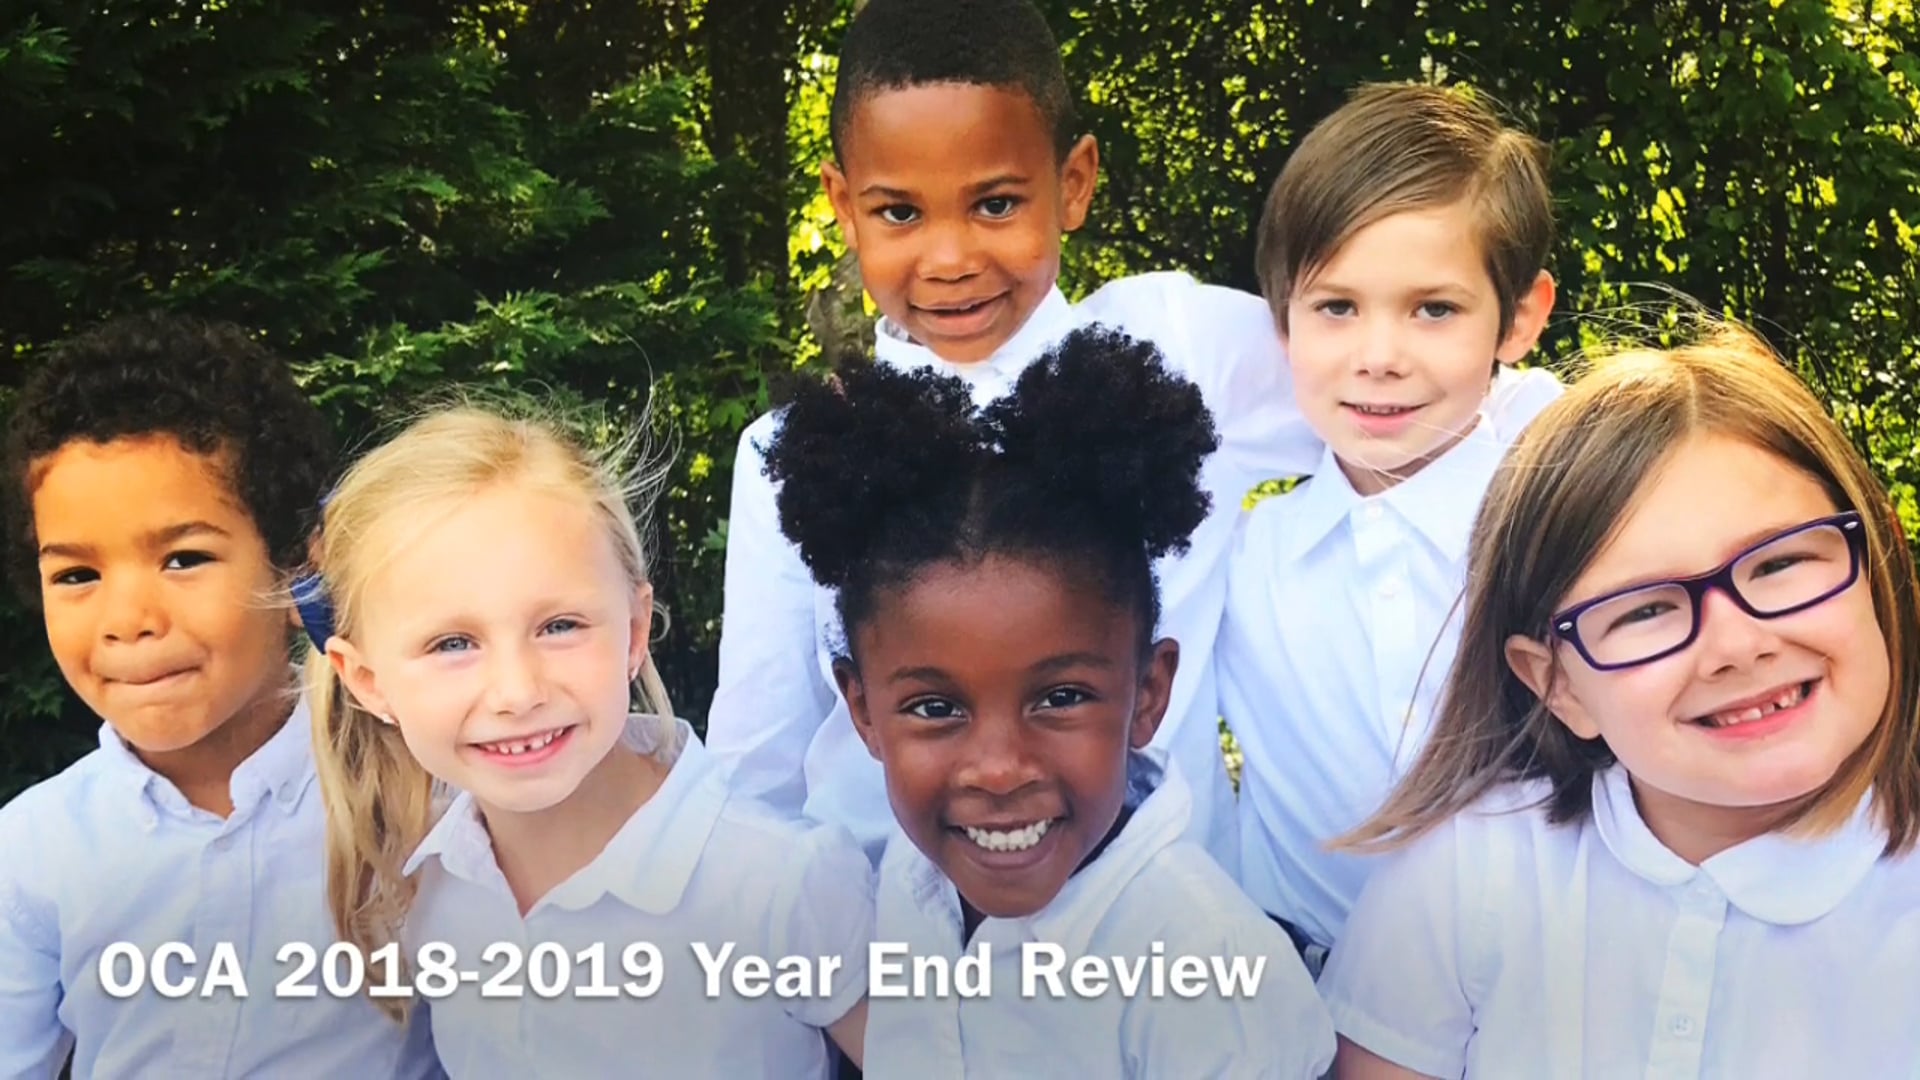 OCA Year End Review 2018-2019